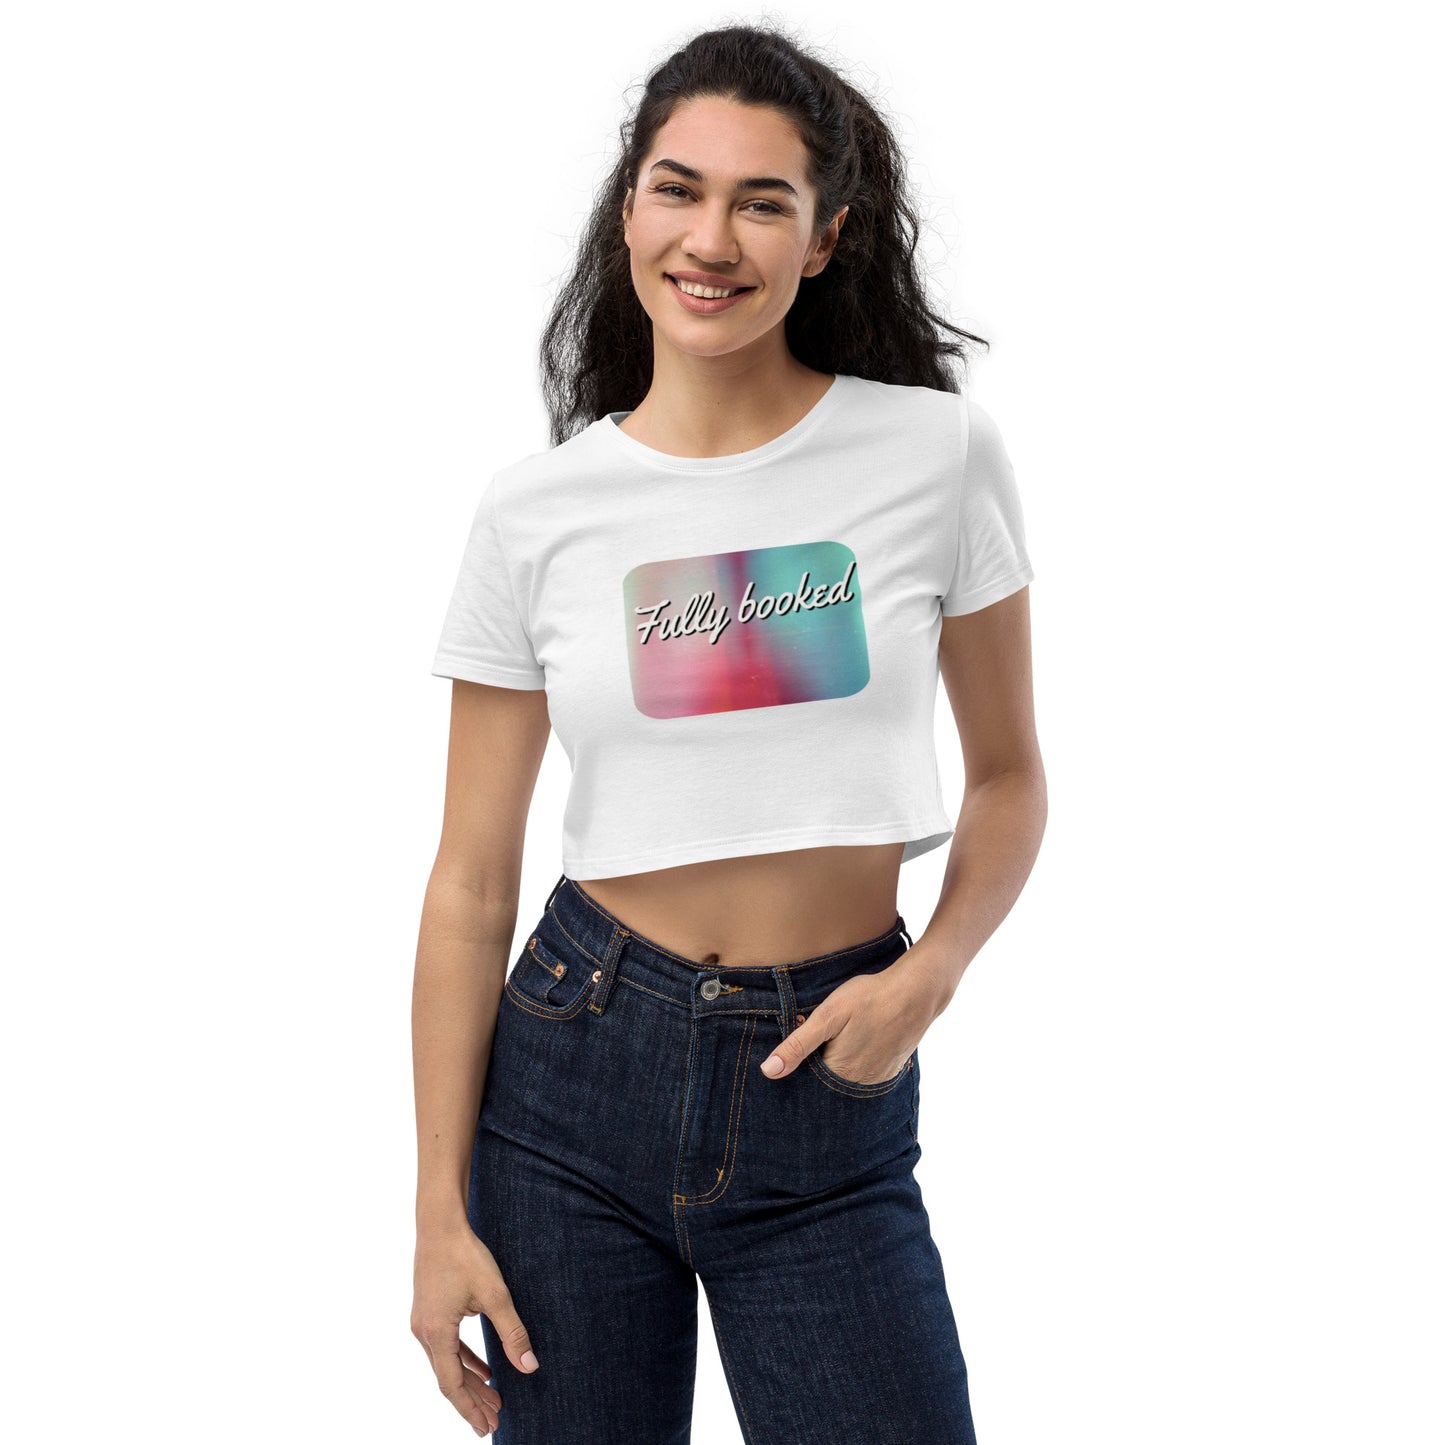 Fully booked Organic Crop Top